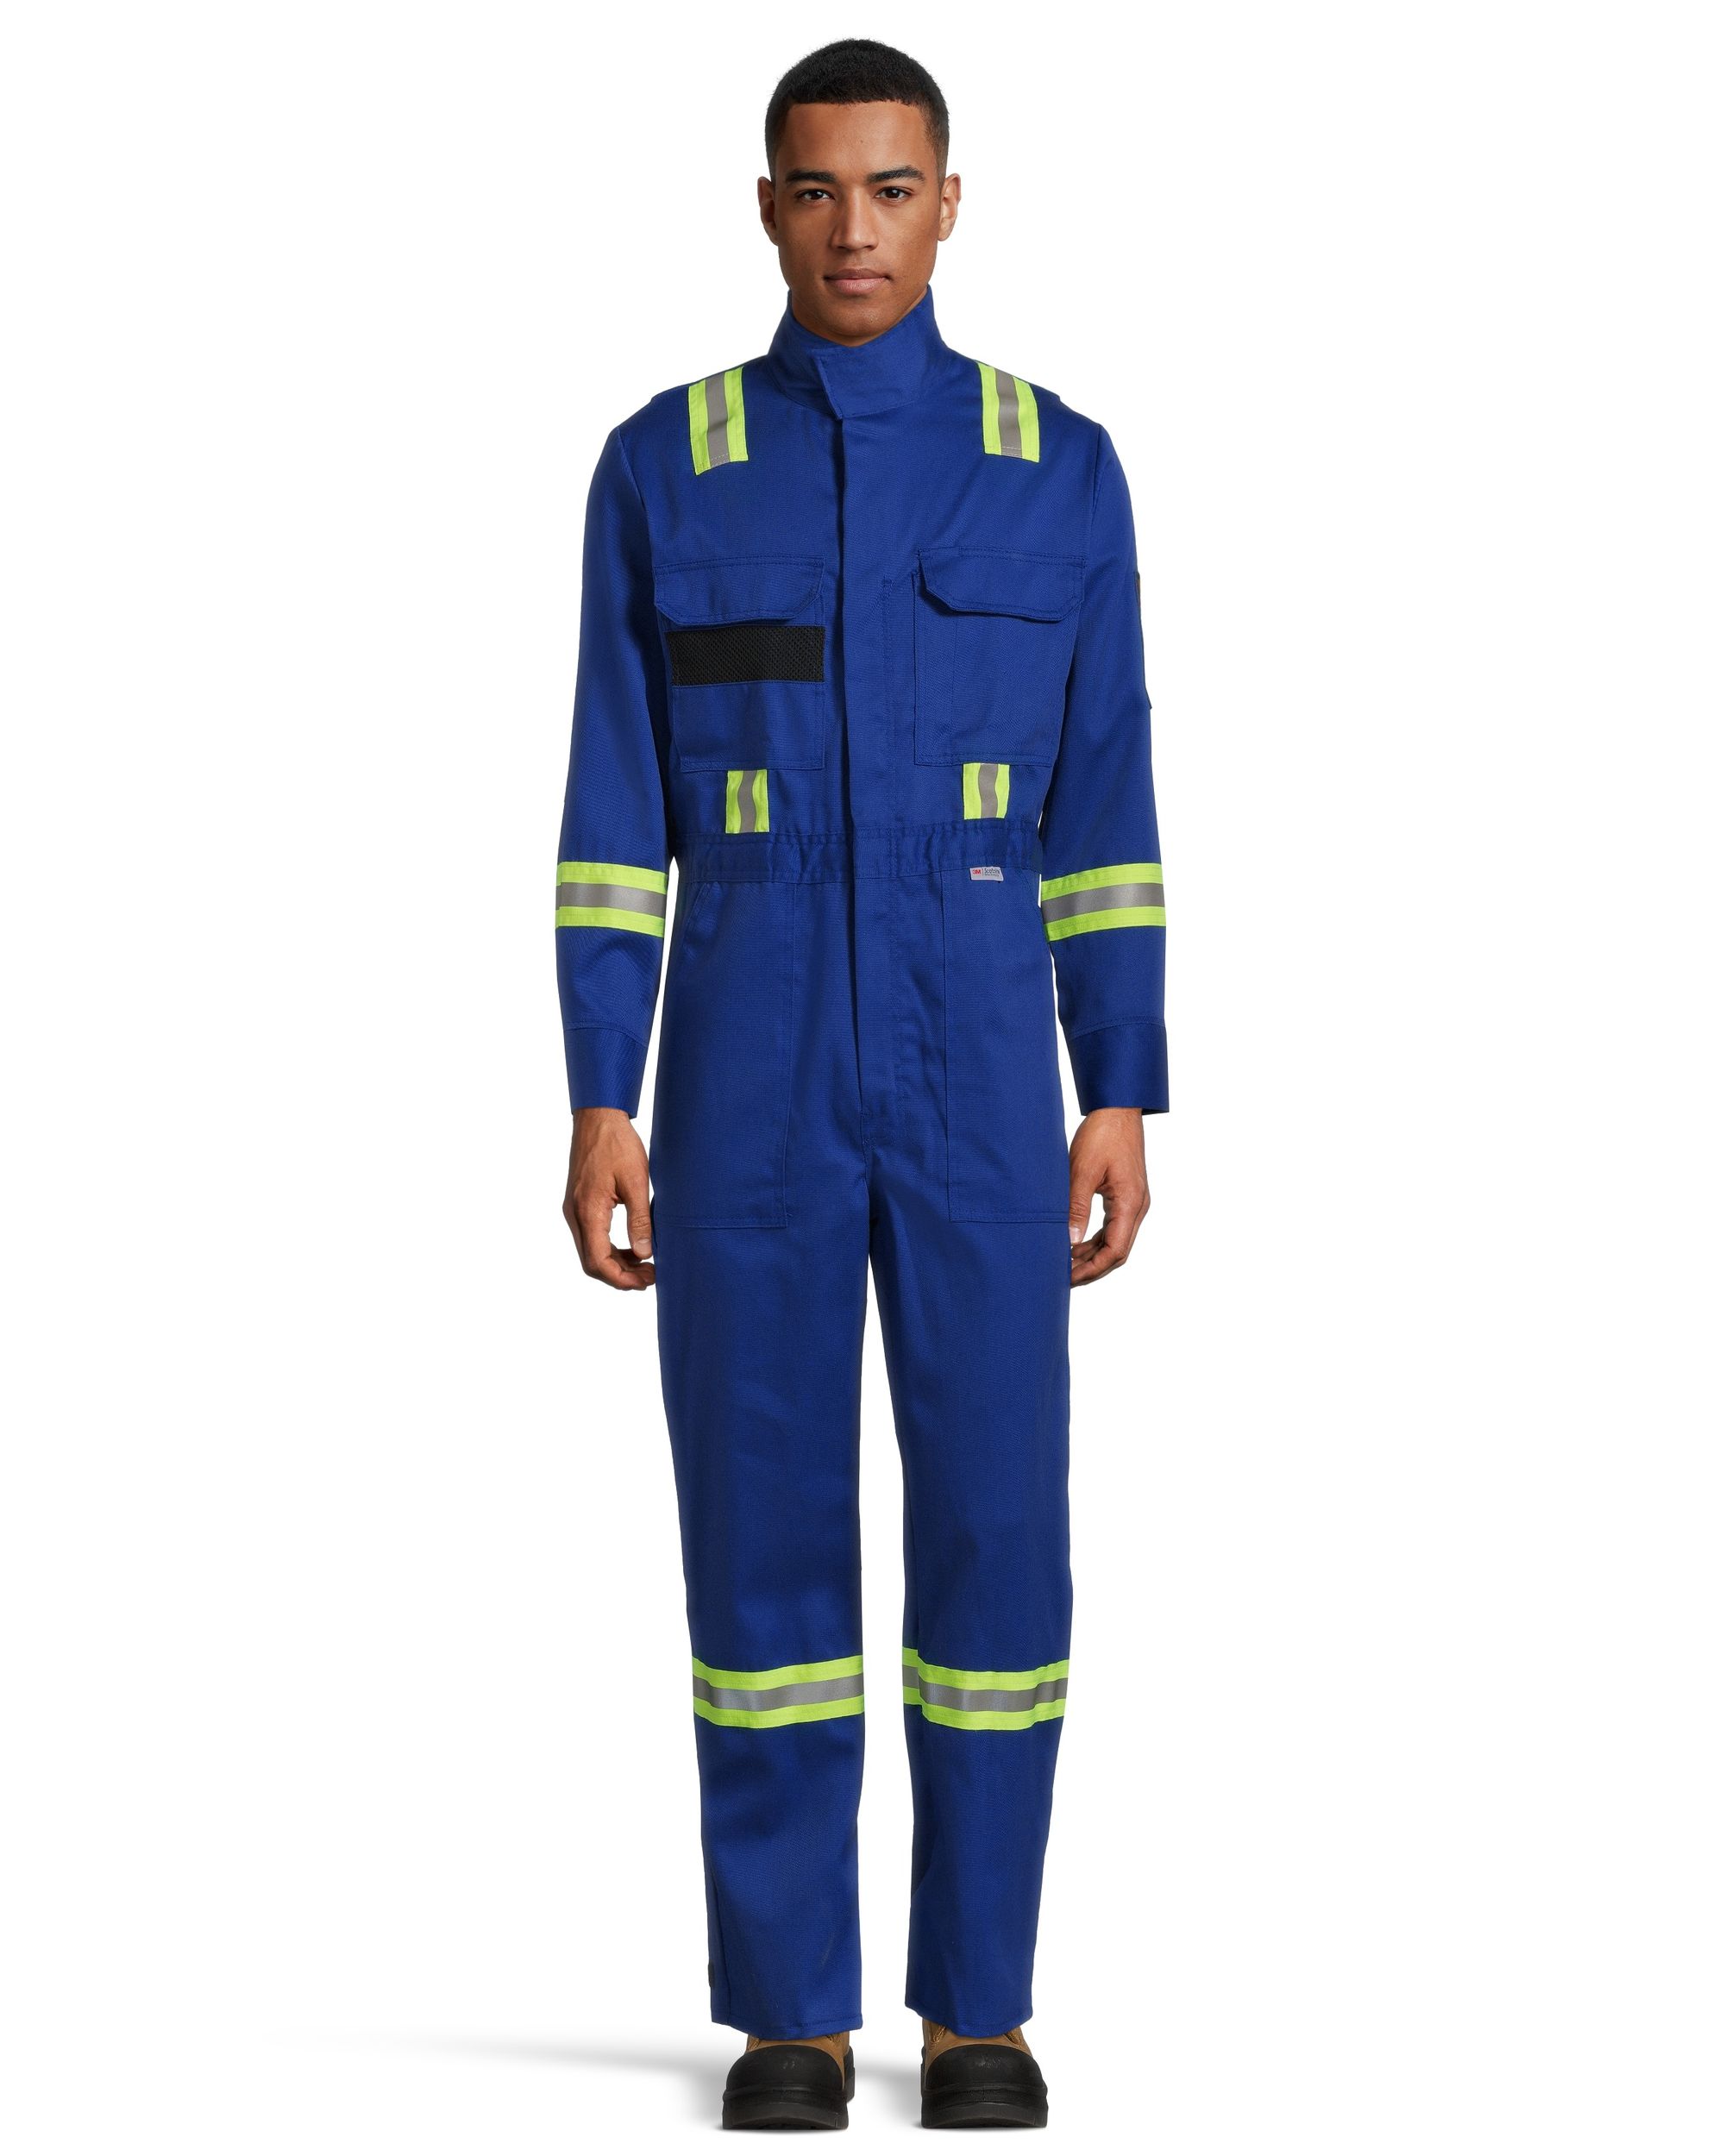 Firewall Men's 7 oz Flame-Resistant Unlined Coverall with